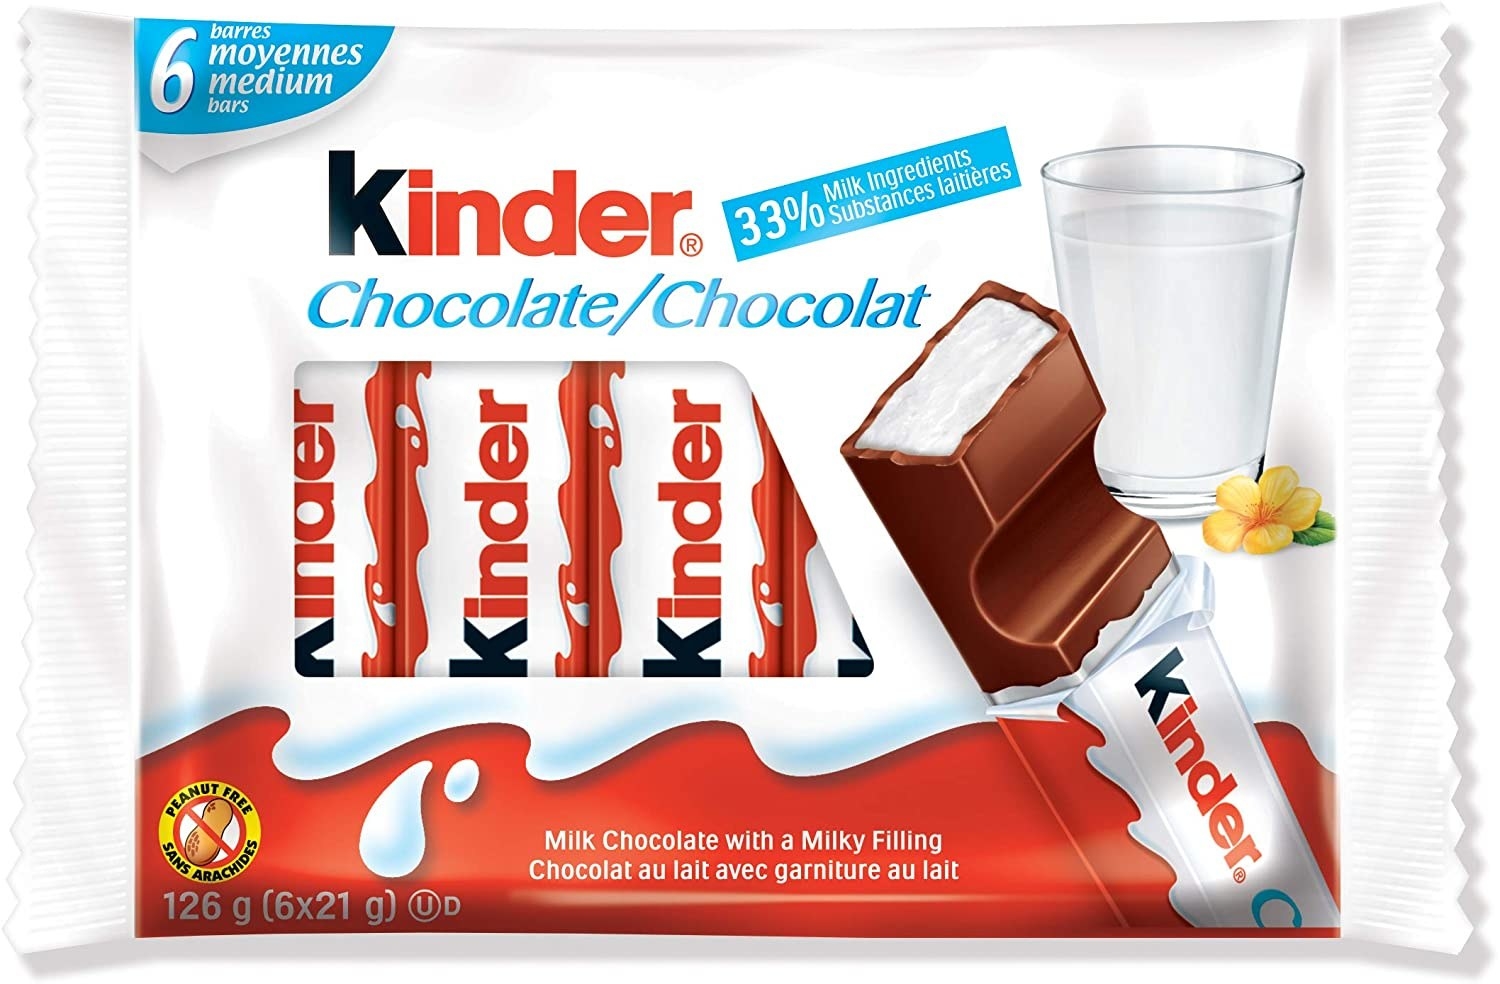 The mini Kinder bars in their package